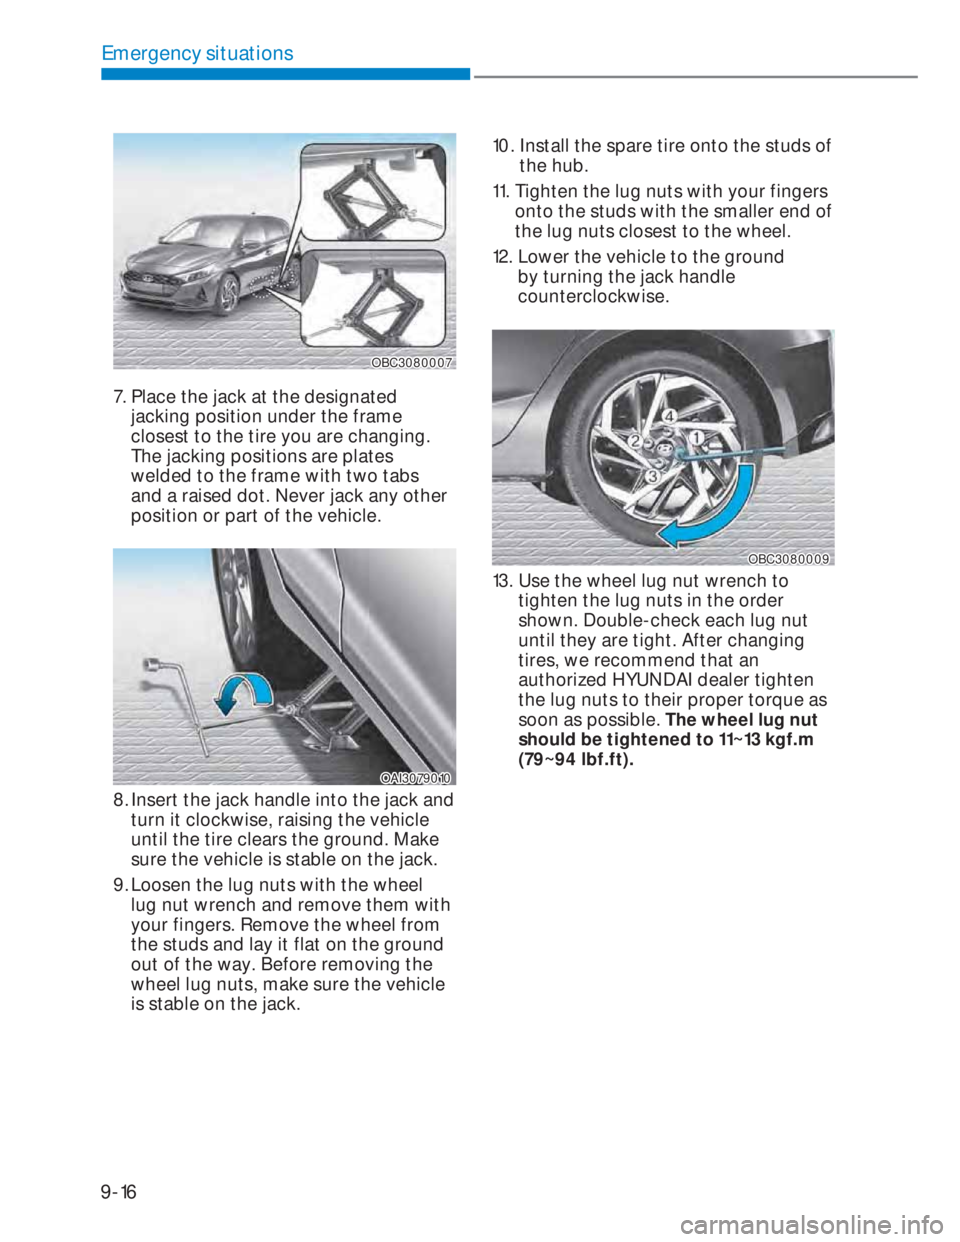 HYUNDAI I20 2021  Owners Manual 9-16
Emergency situations
OBC3080007OBC3080007
7. Place the jack at the designated 
jacking position under the frame 
closest to the tire you are changing. 
The jacking positions are plates 
welded to